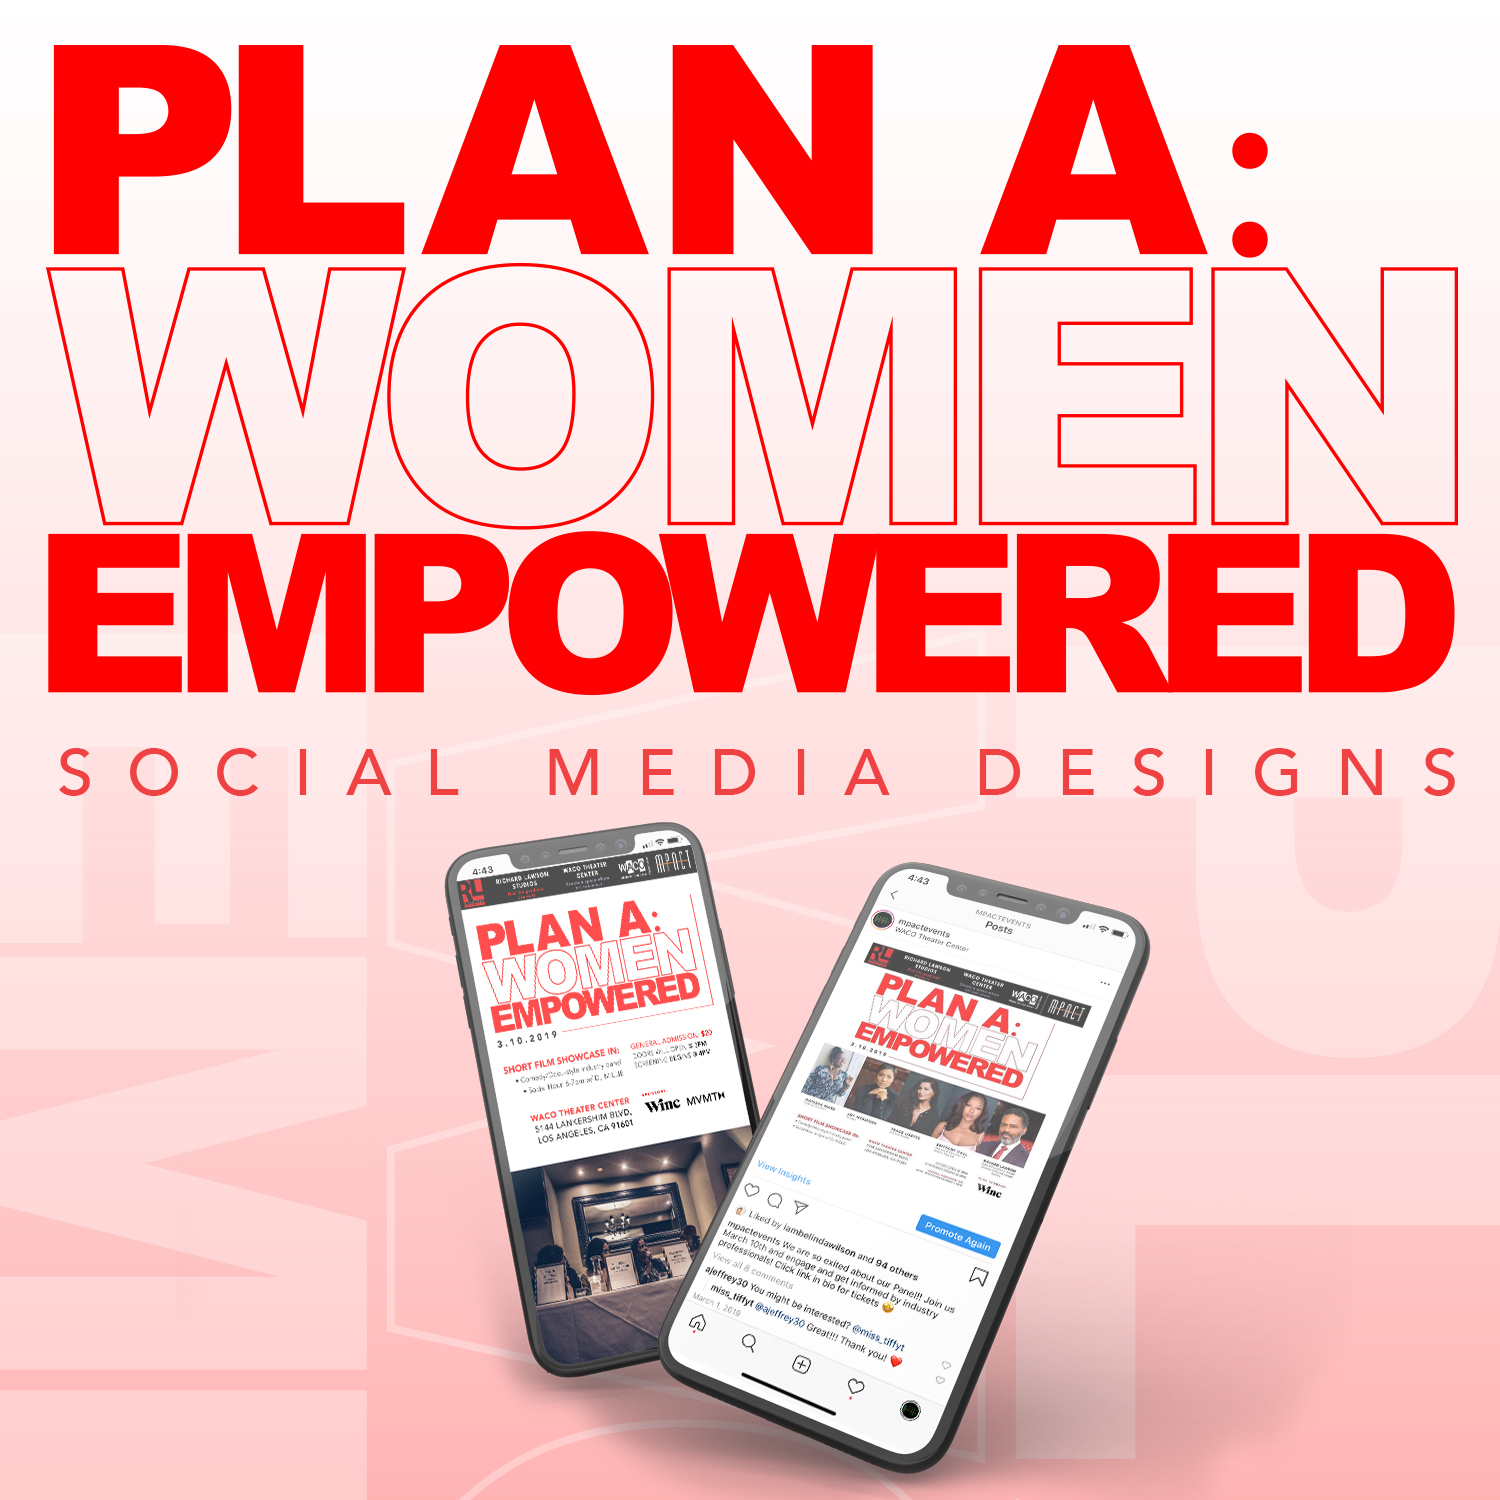 Plan A: Women Empowered project cover